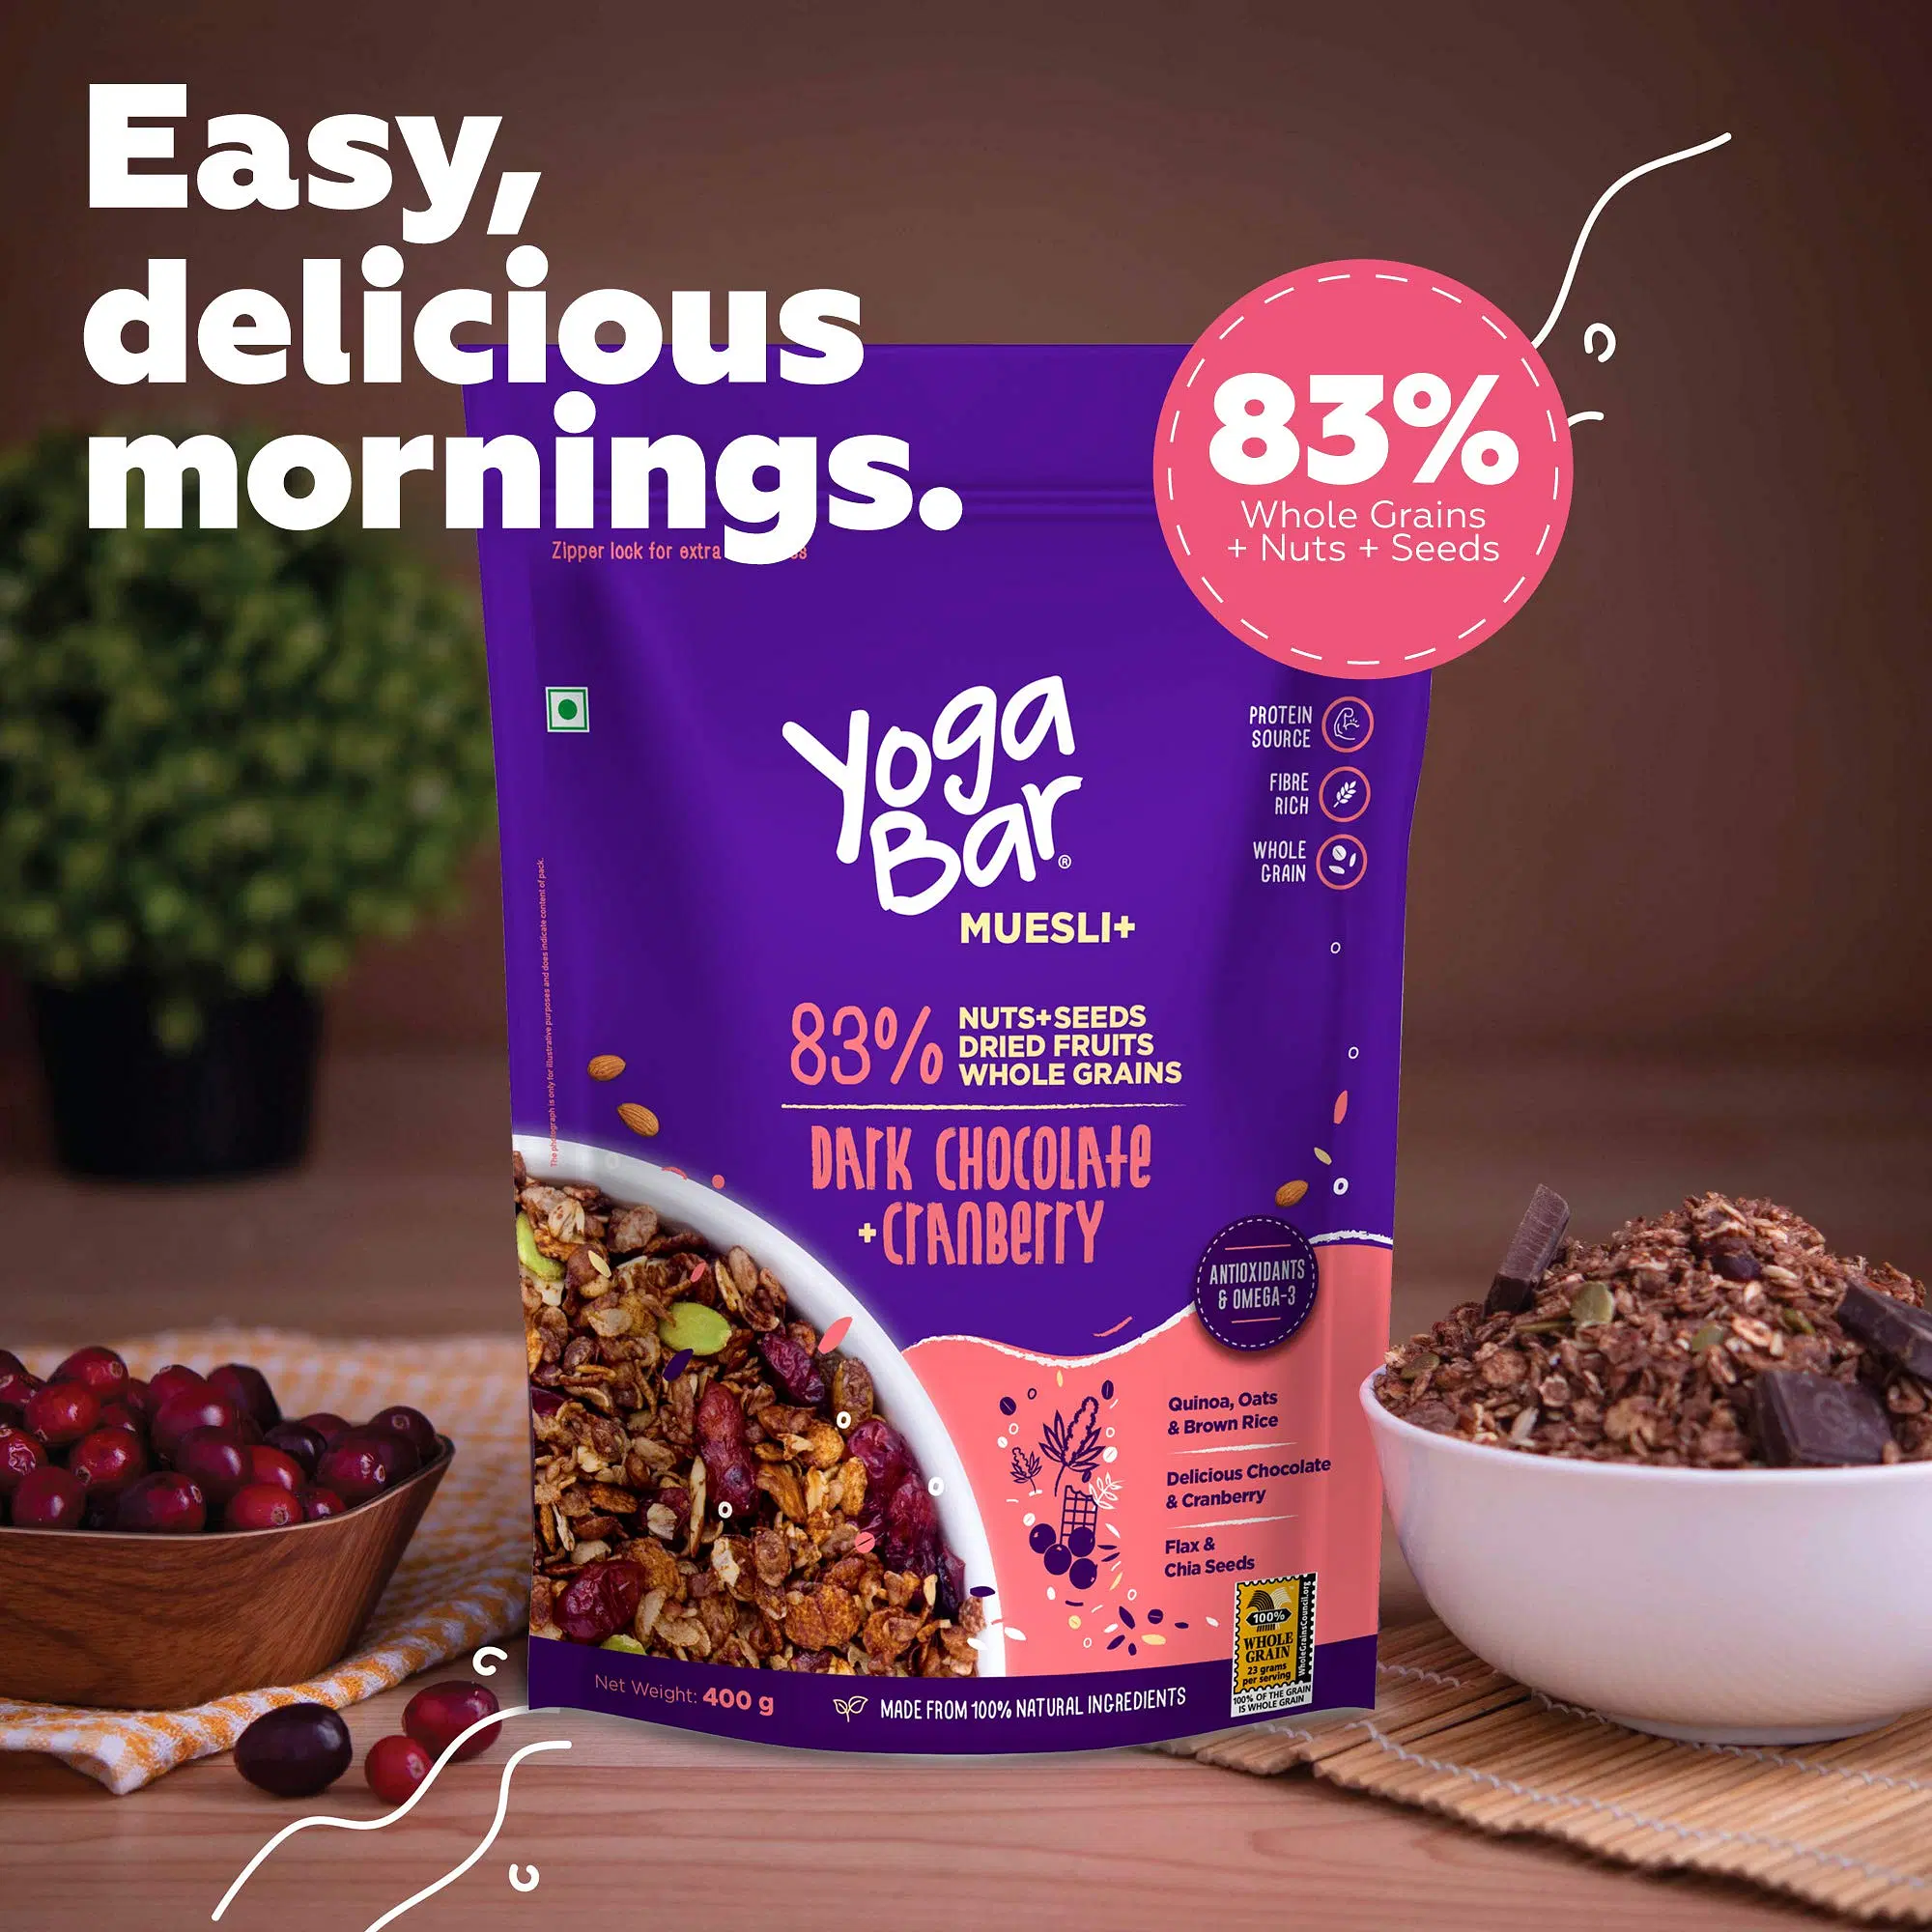 Yogabar Dark Chocolate & Cranberry Muesli 700g - Breakfast Cereal with 83%  Nuts & Seeds, Dried Fruits, & Whole Grains - Vegan & Gluten Free Snack